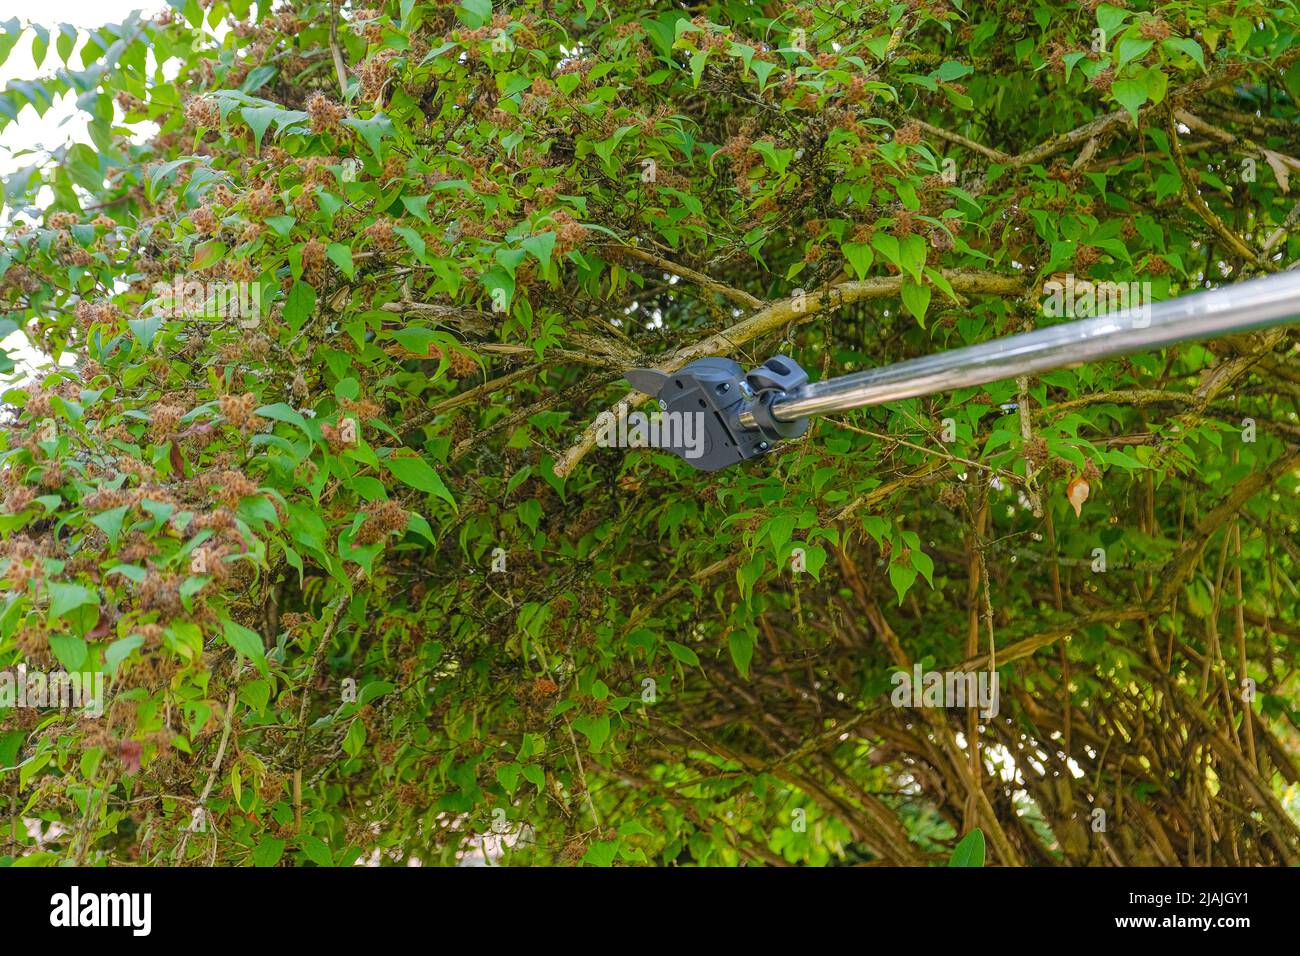 Pruning tall trees in the garden.Telescopic garden shears cut branches .telescopic pruner for pruning branches. Pruning Tool.Gardening and farming Stock Photo